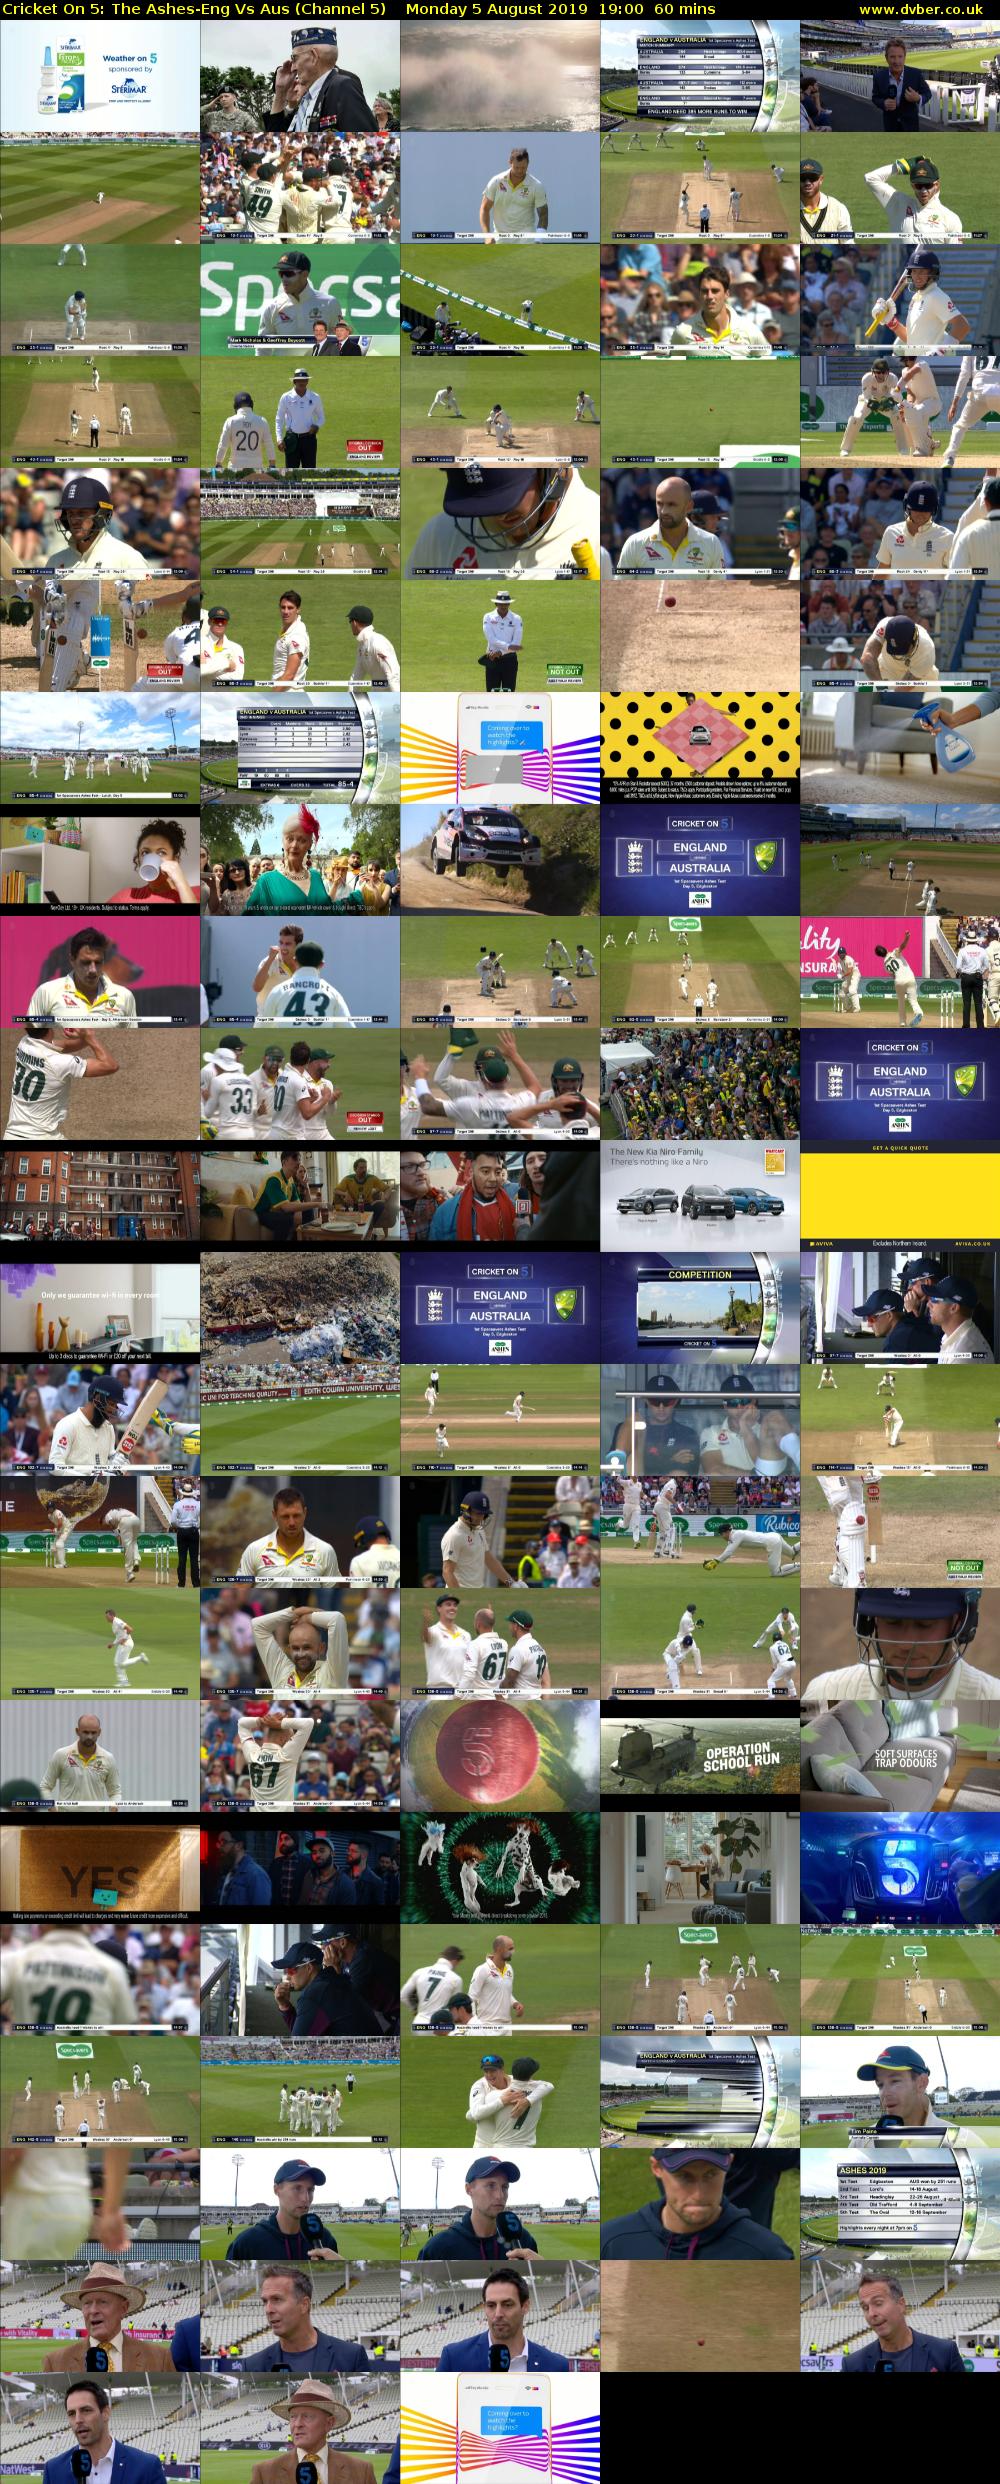 Cricket On 5: The Ashes-Eng Vs Aus (Channel 5) Monday 5 August 2019 19:00 - 20:00